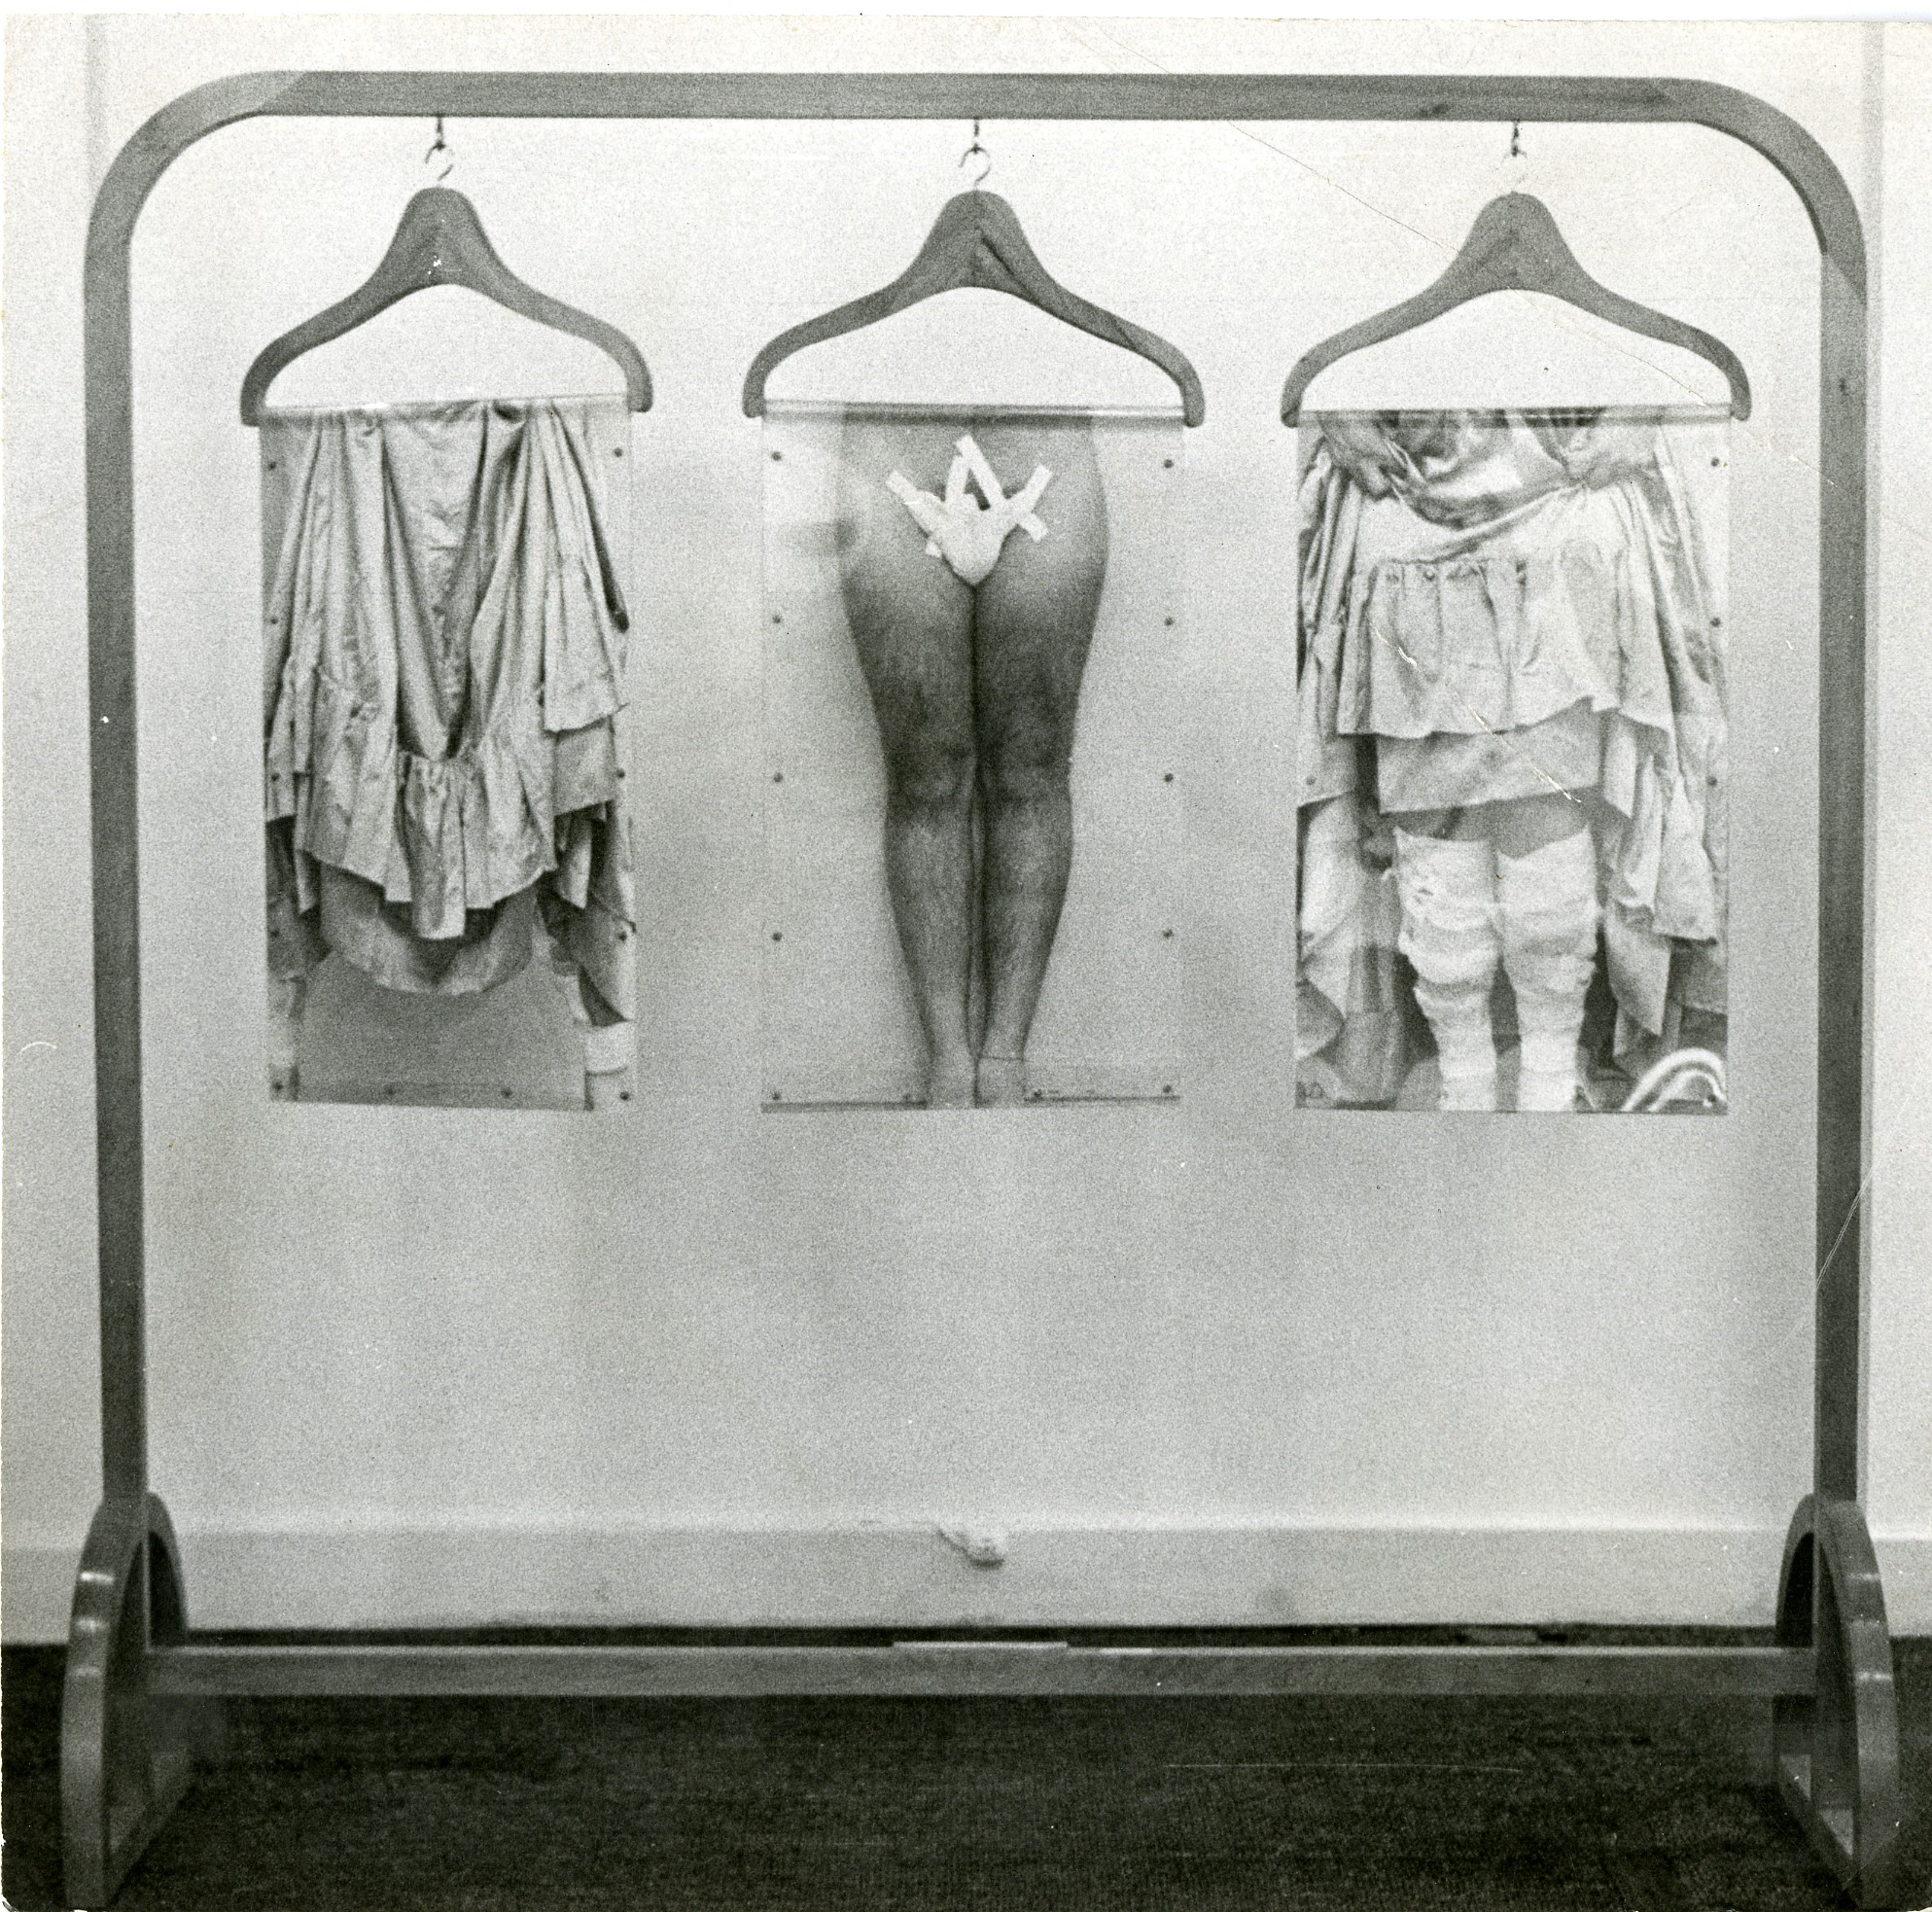 A wooden clothes rack with three hangers display a triptych of photo-based collages of the lower body.